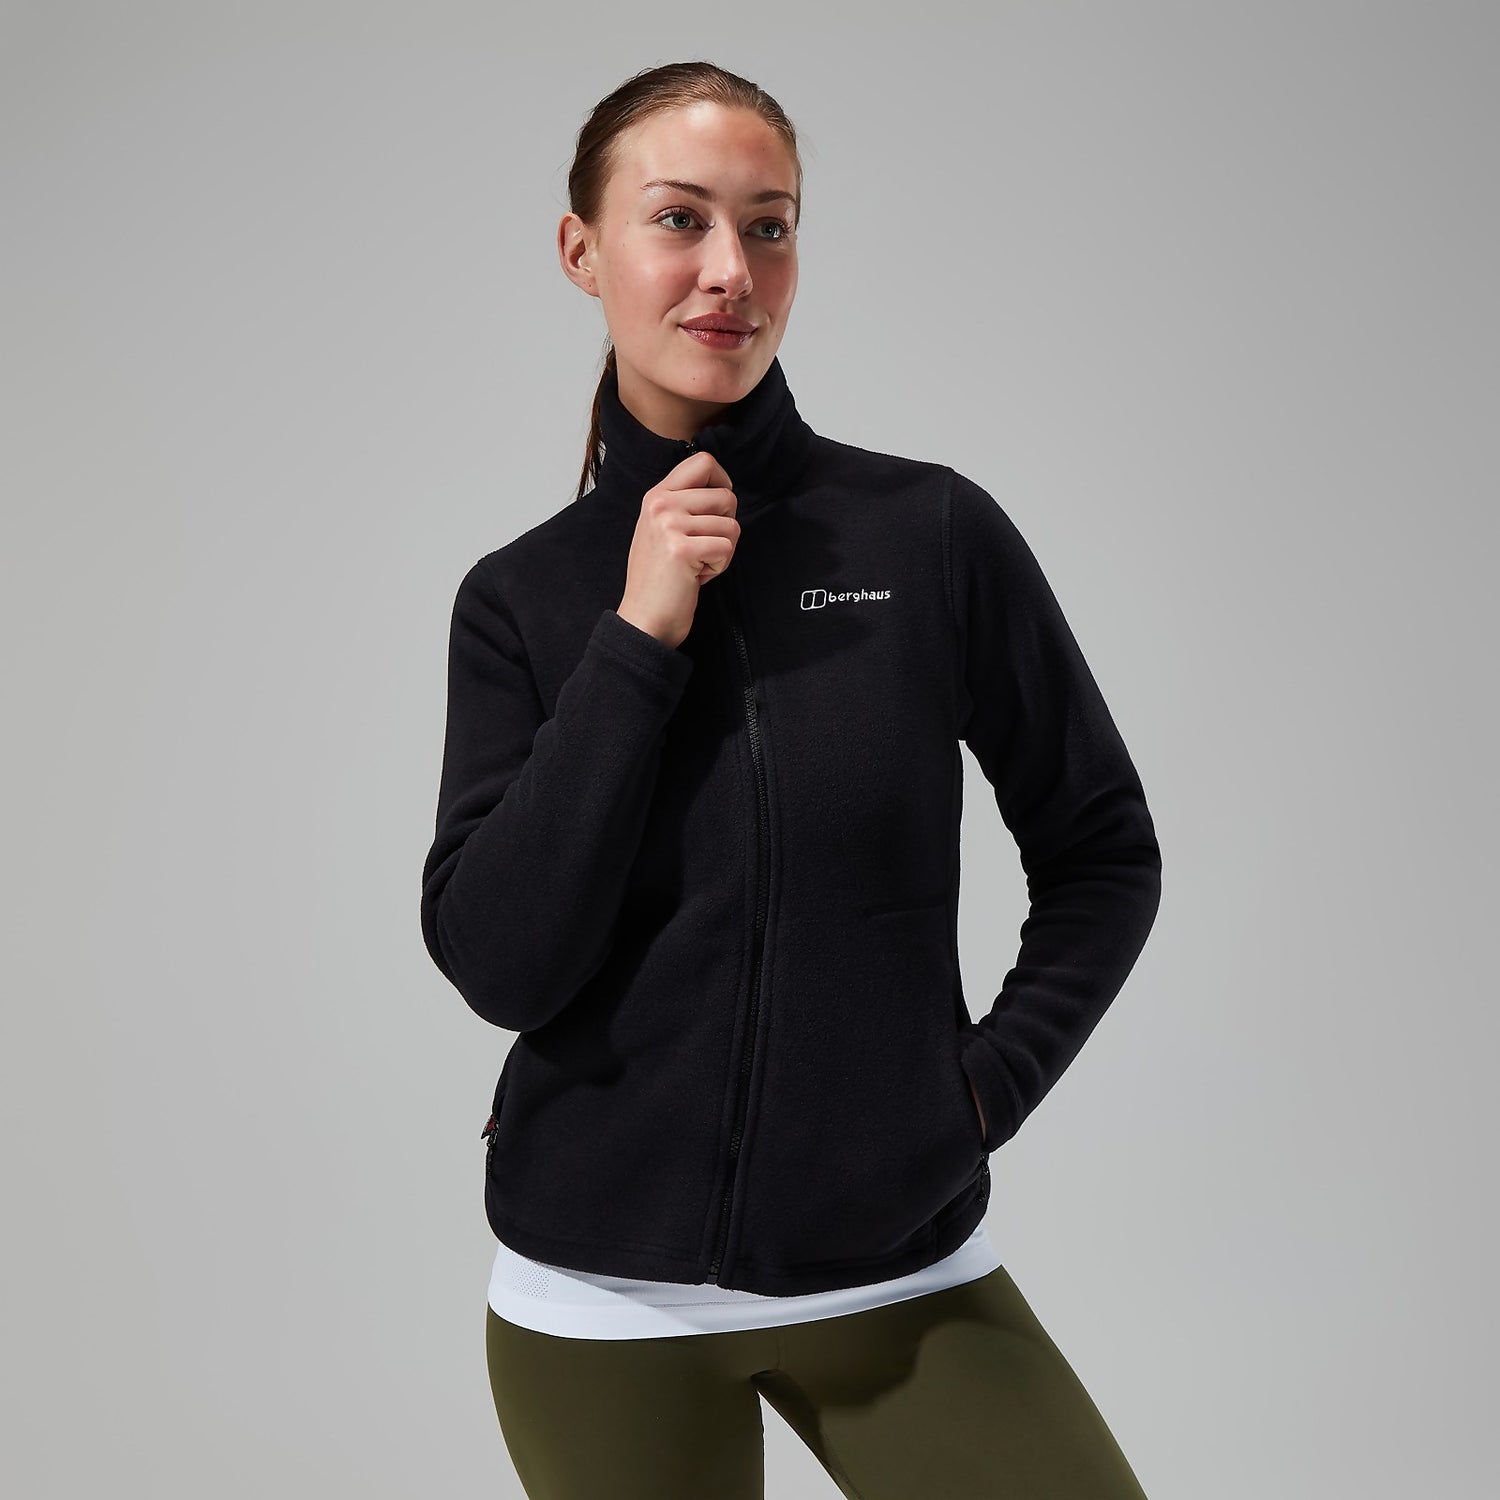 Unlock Wilderness' choice in the Berghaus Vs North Face comparison, the Prism Polartec InterActive Jacket by Berghaus